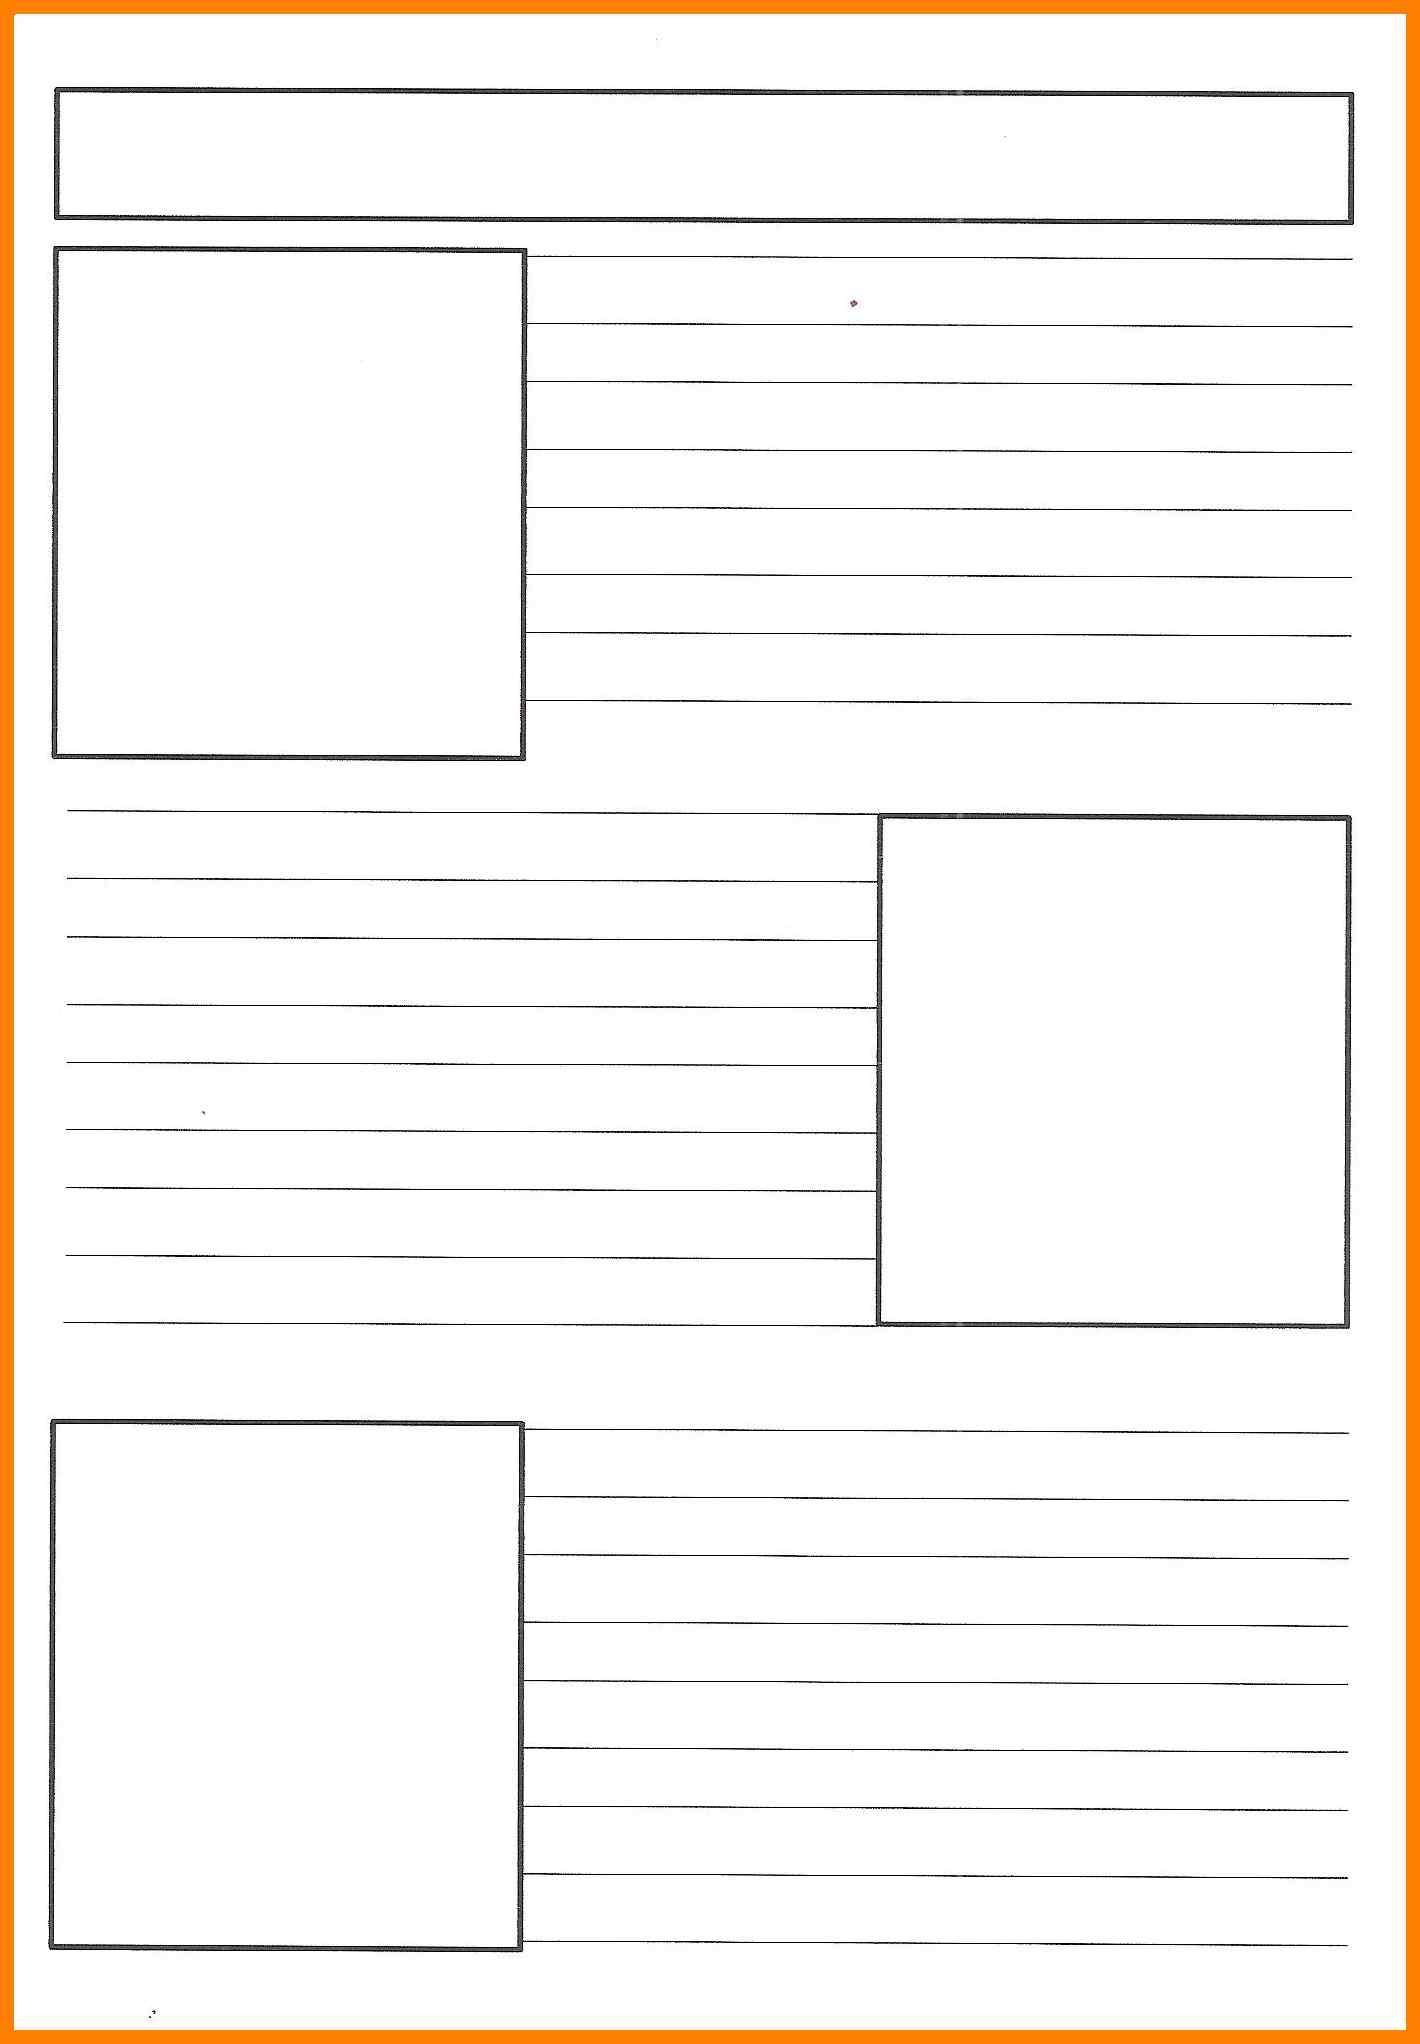 Free Printable Newspaper Template | Reference | Pinterest - Free Printable Newspaper Templates For Students